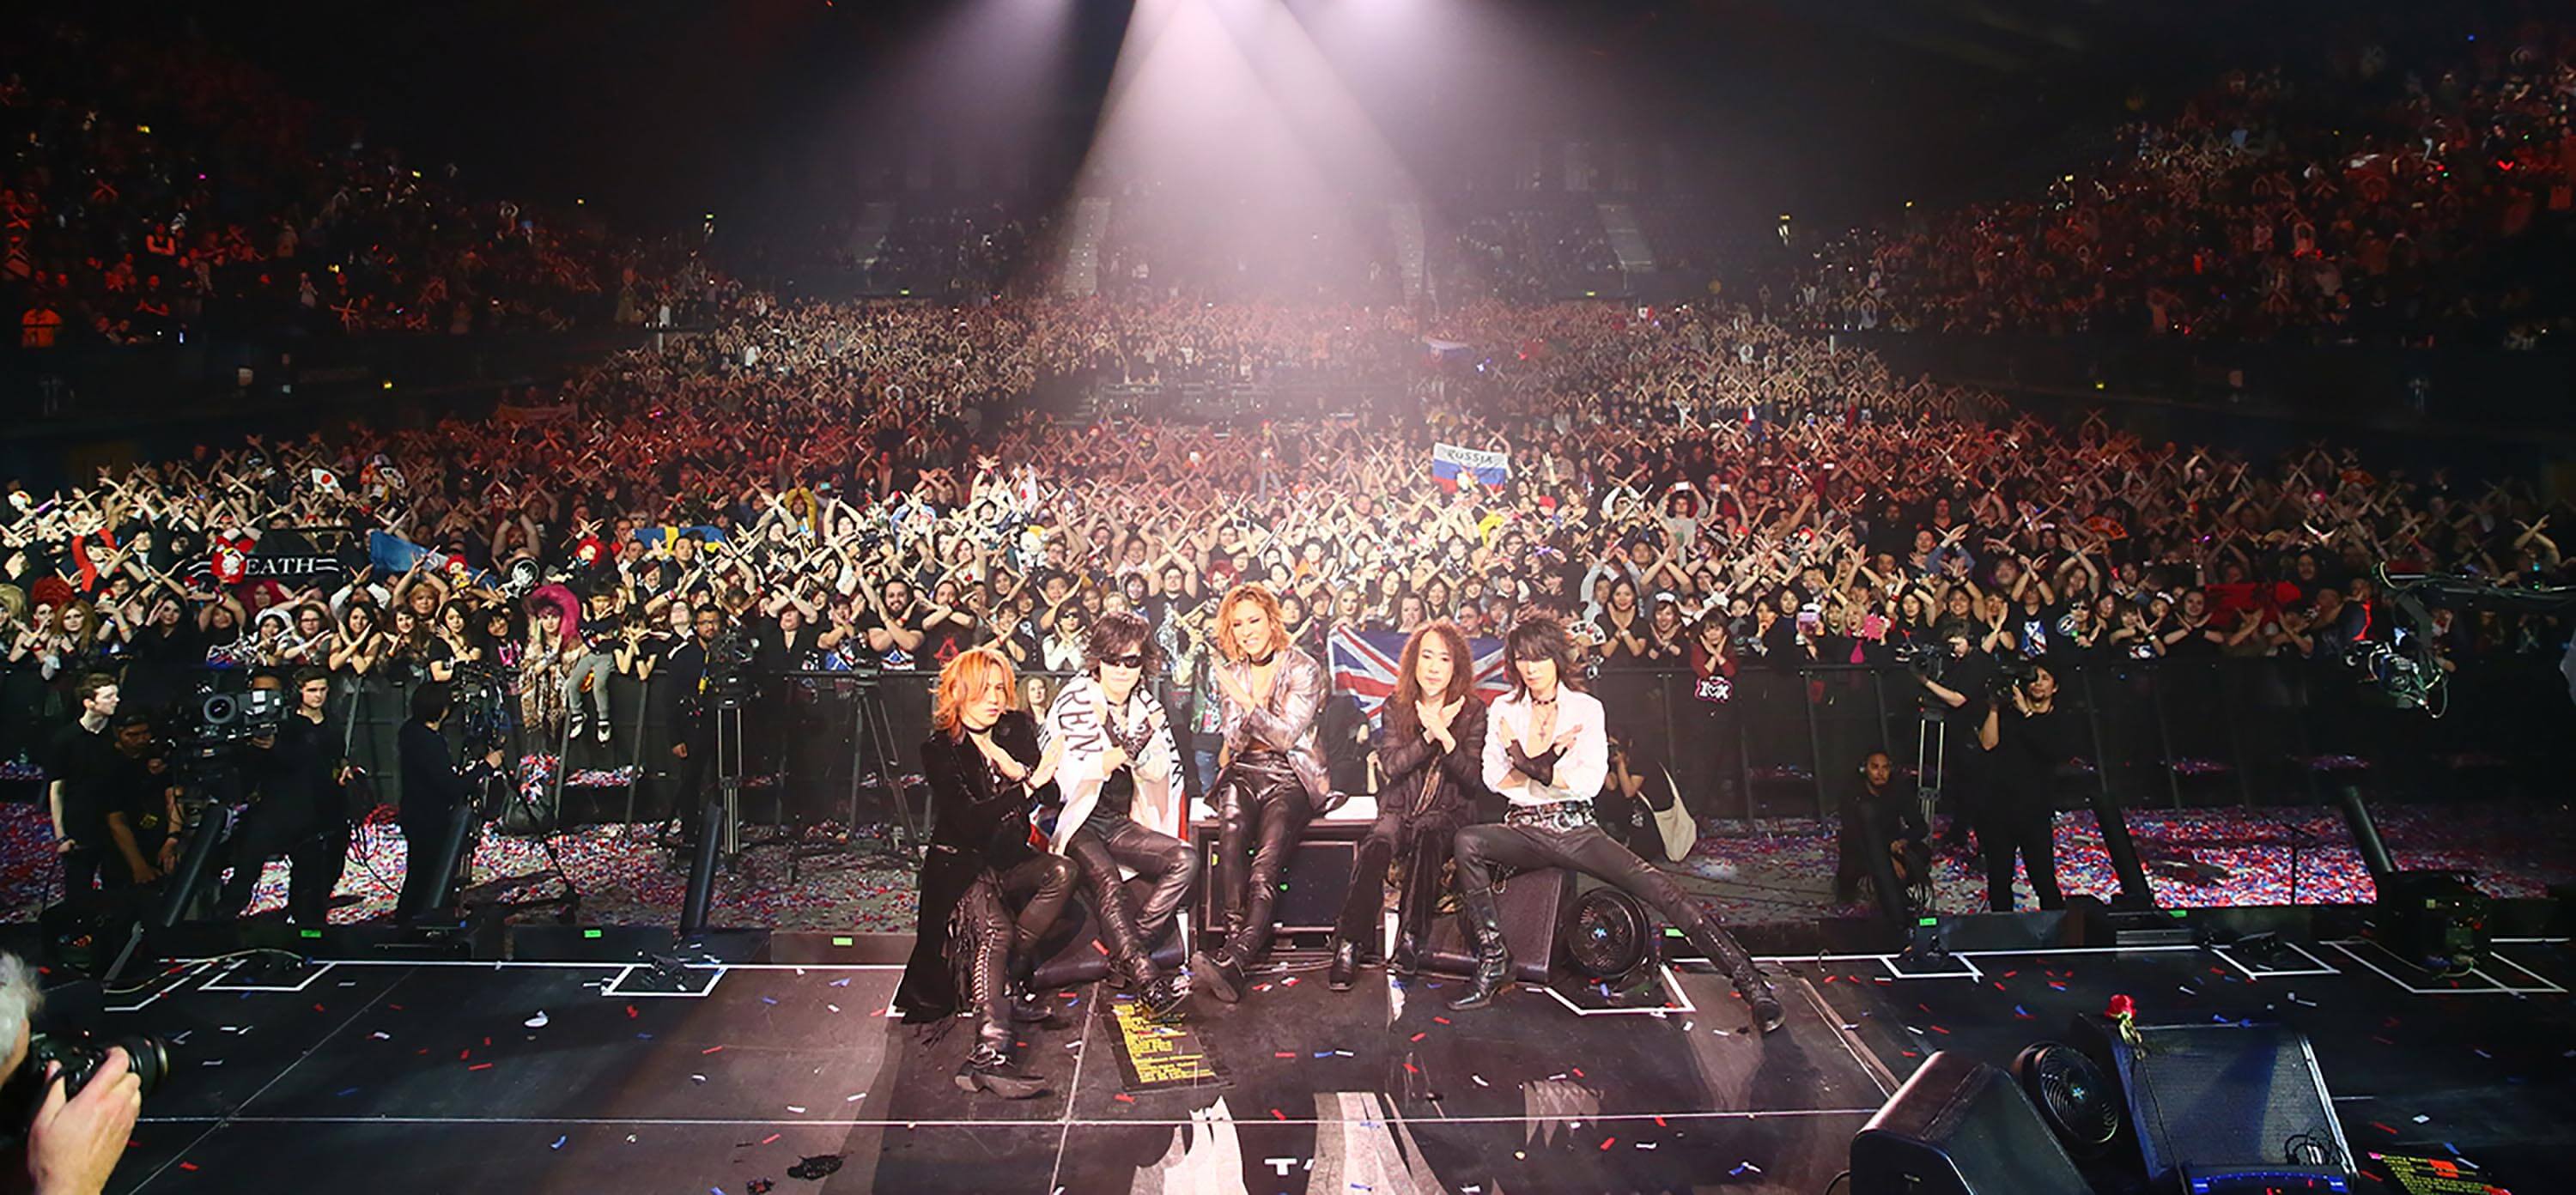 X JAPAN At Wembley Arena 2017 in London, England